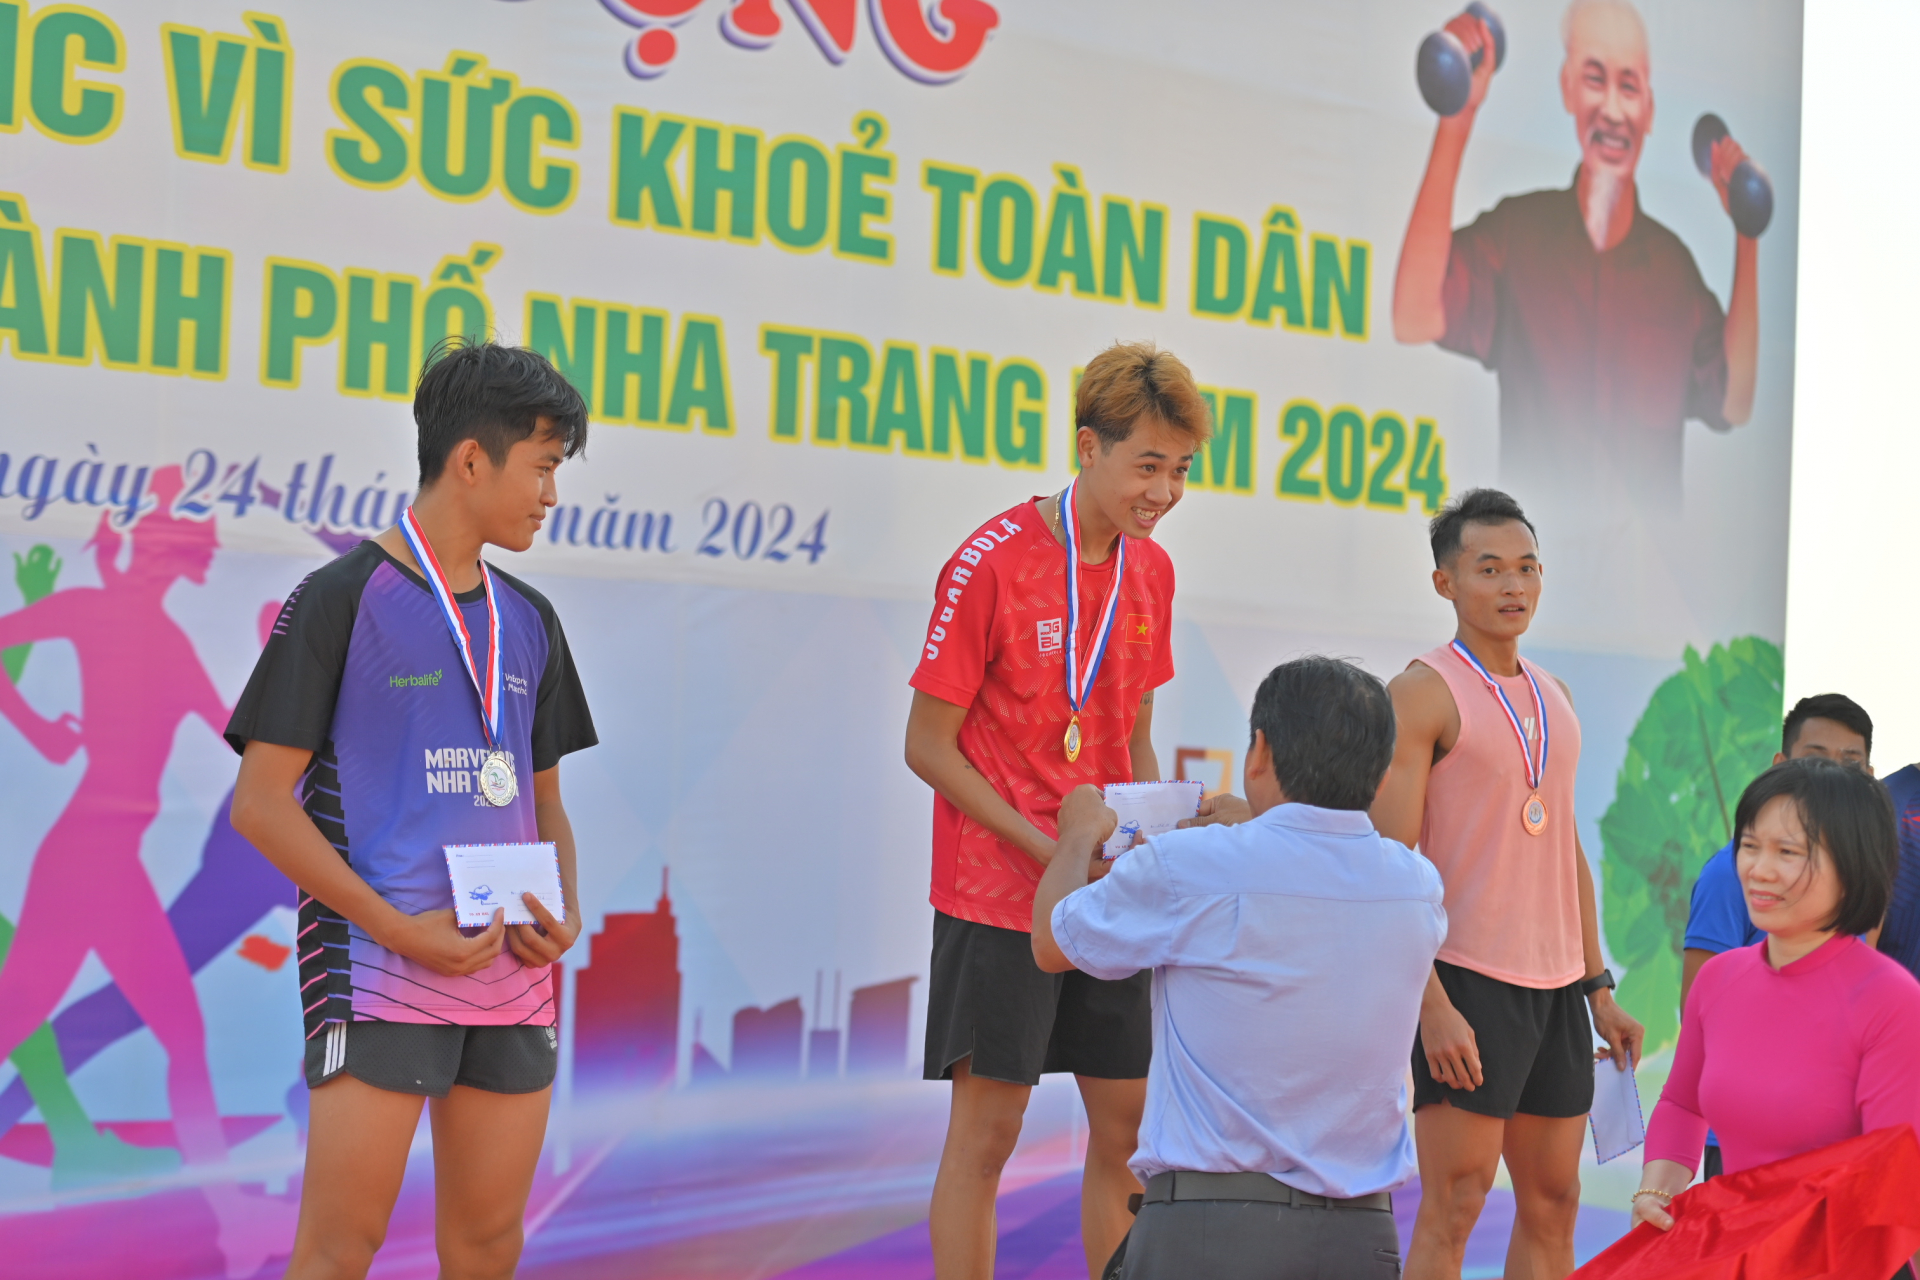 The organization board giving individual and team prizes to outstanding male runners

